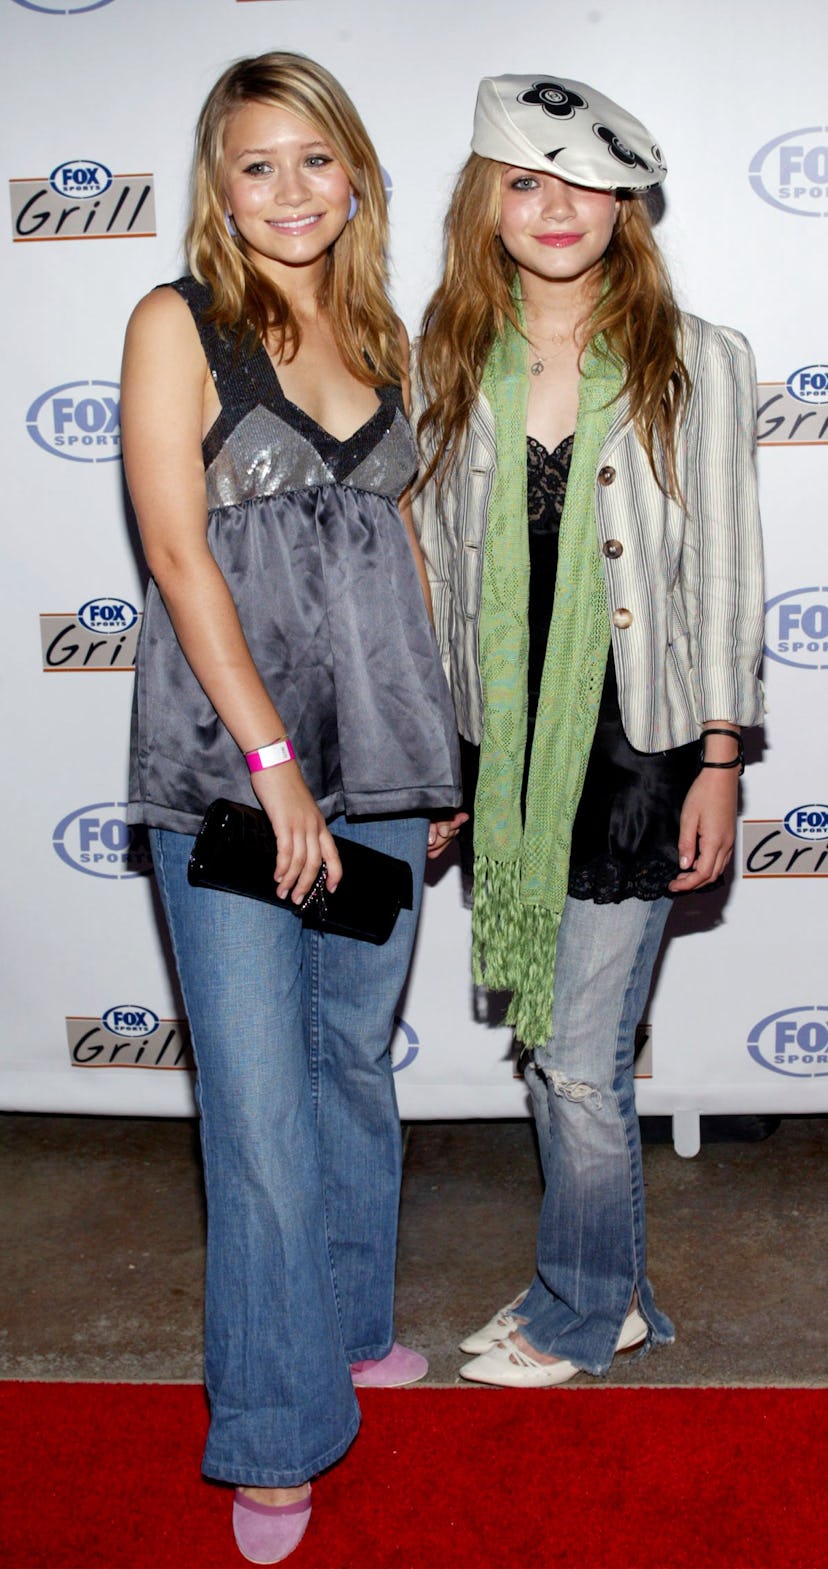 Actors Mary-Kate and Ashley Olsen attend the grand opening of the Fox Sports Grill at the Irvine Spe...